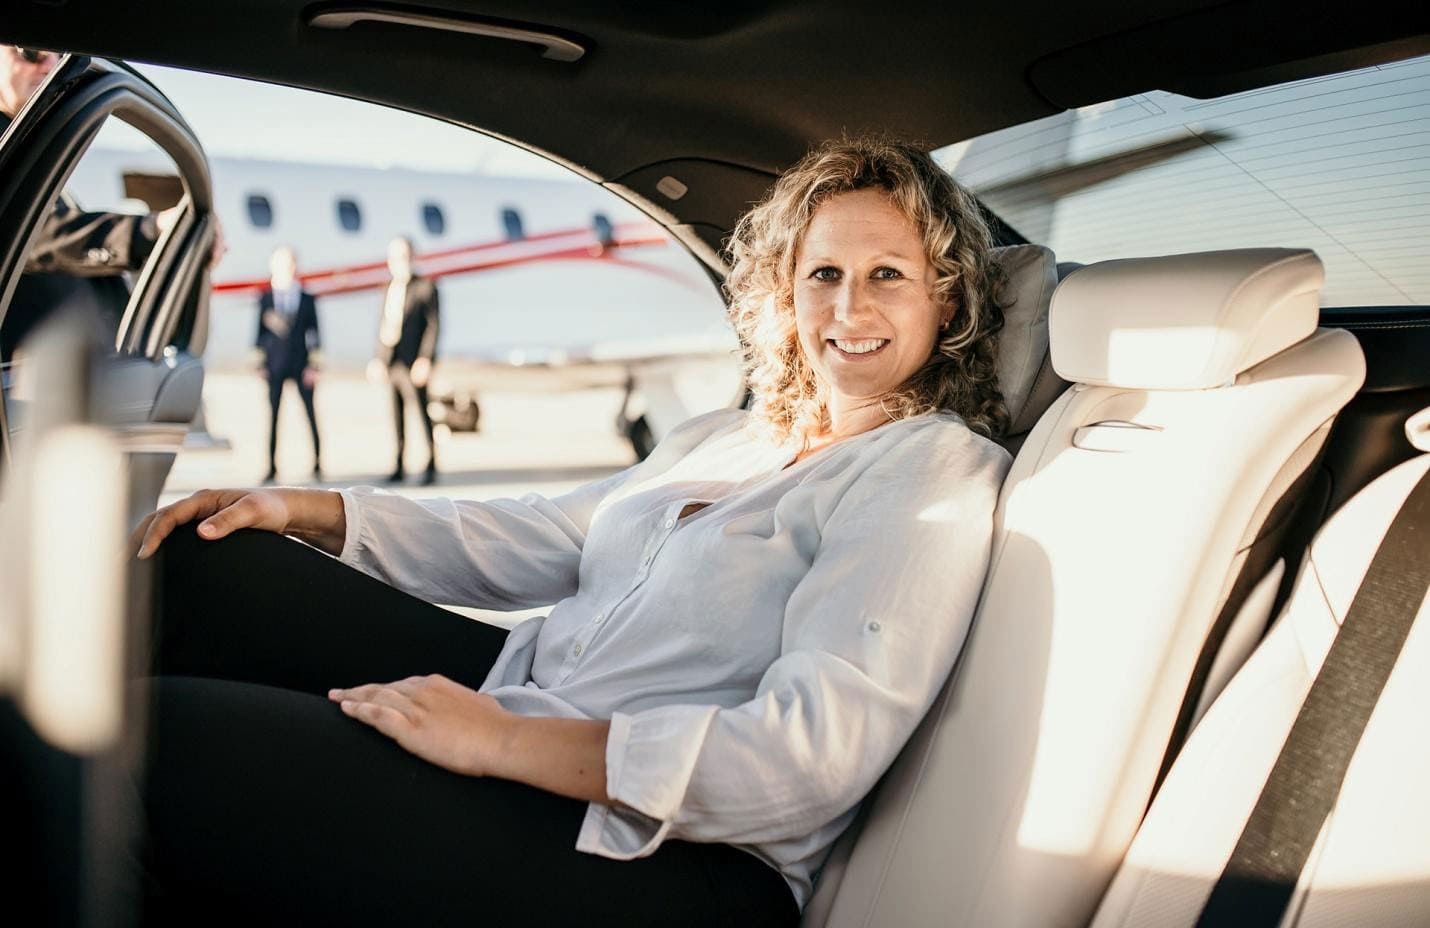 Limos provide convenience on your time schedule